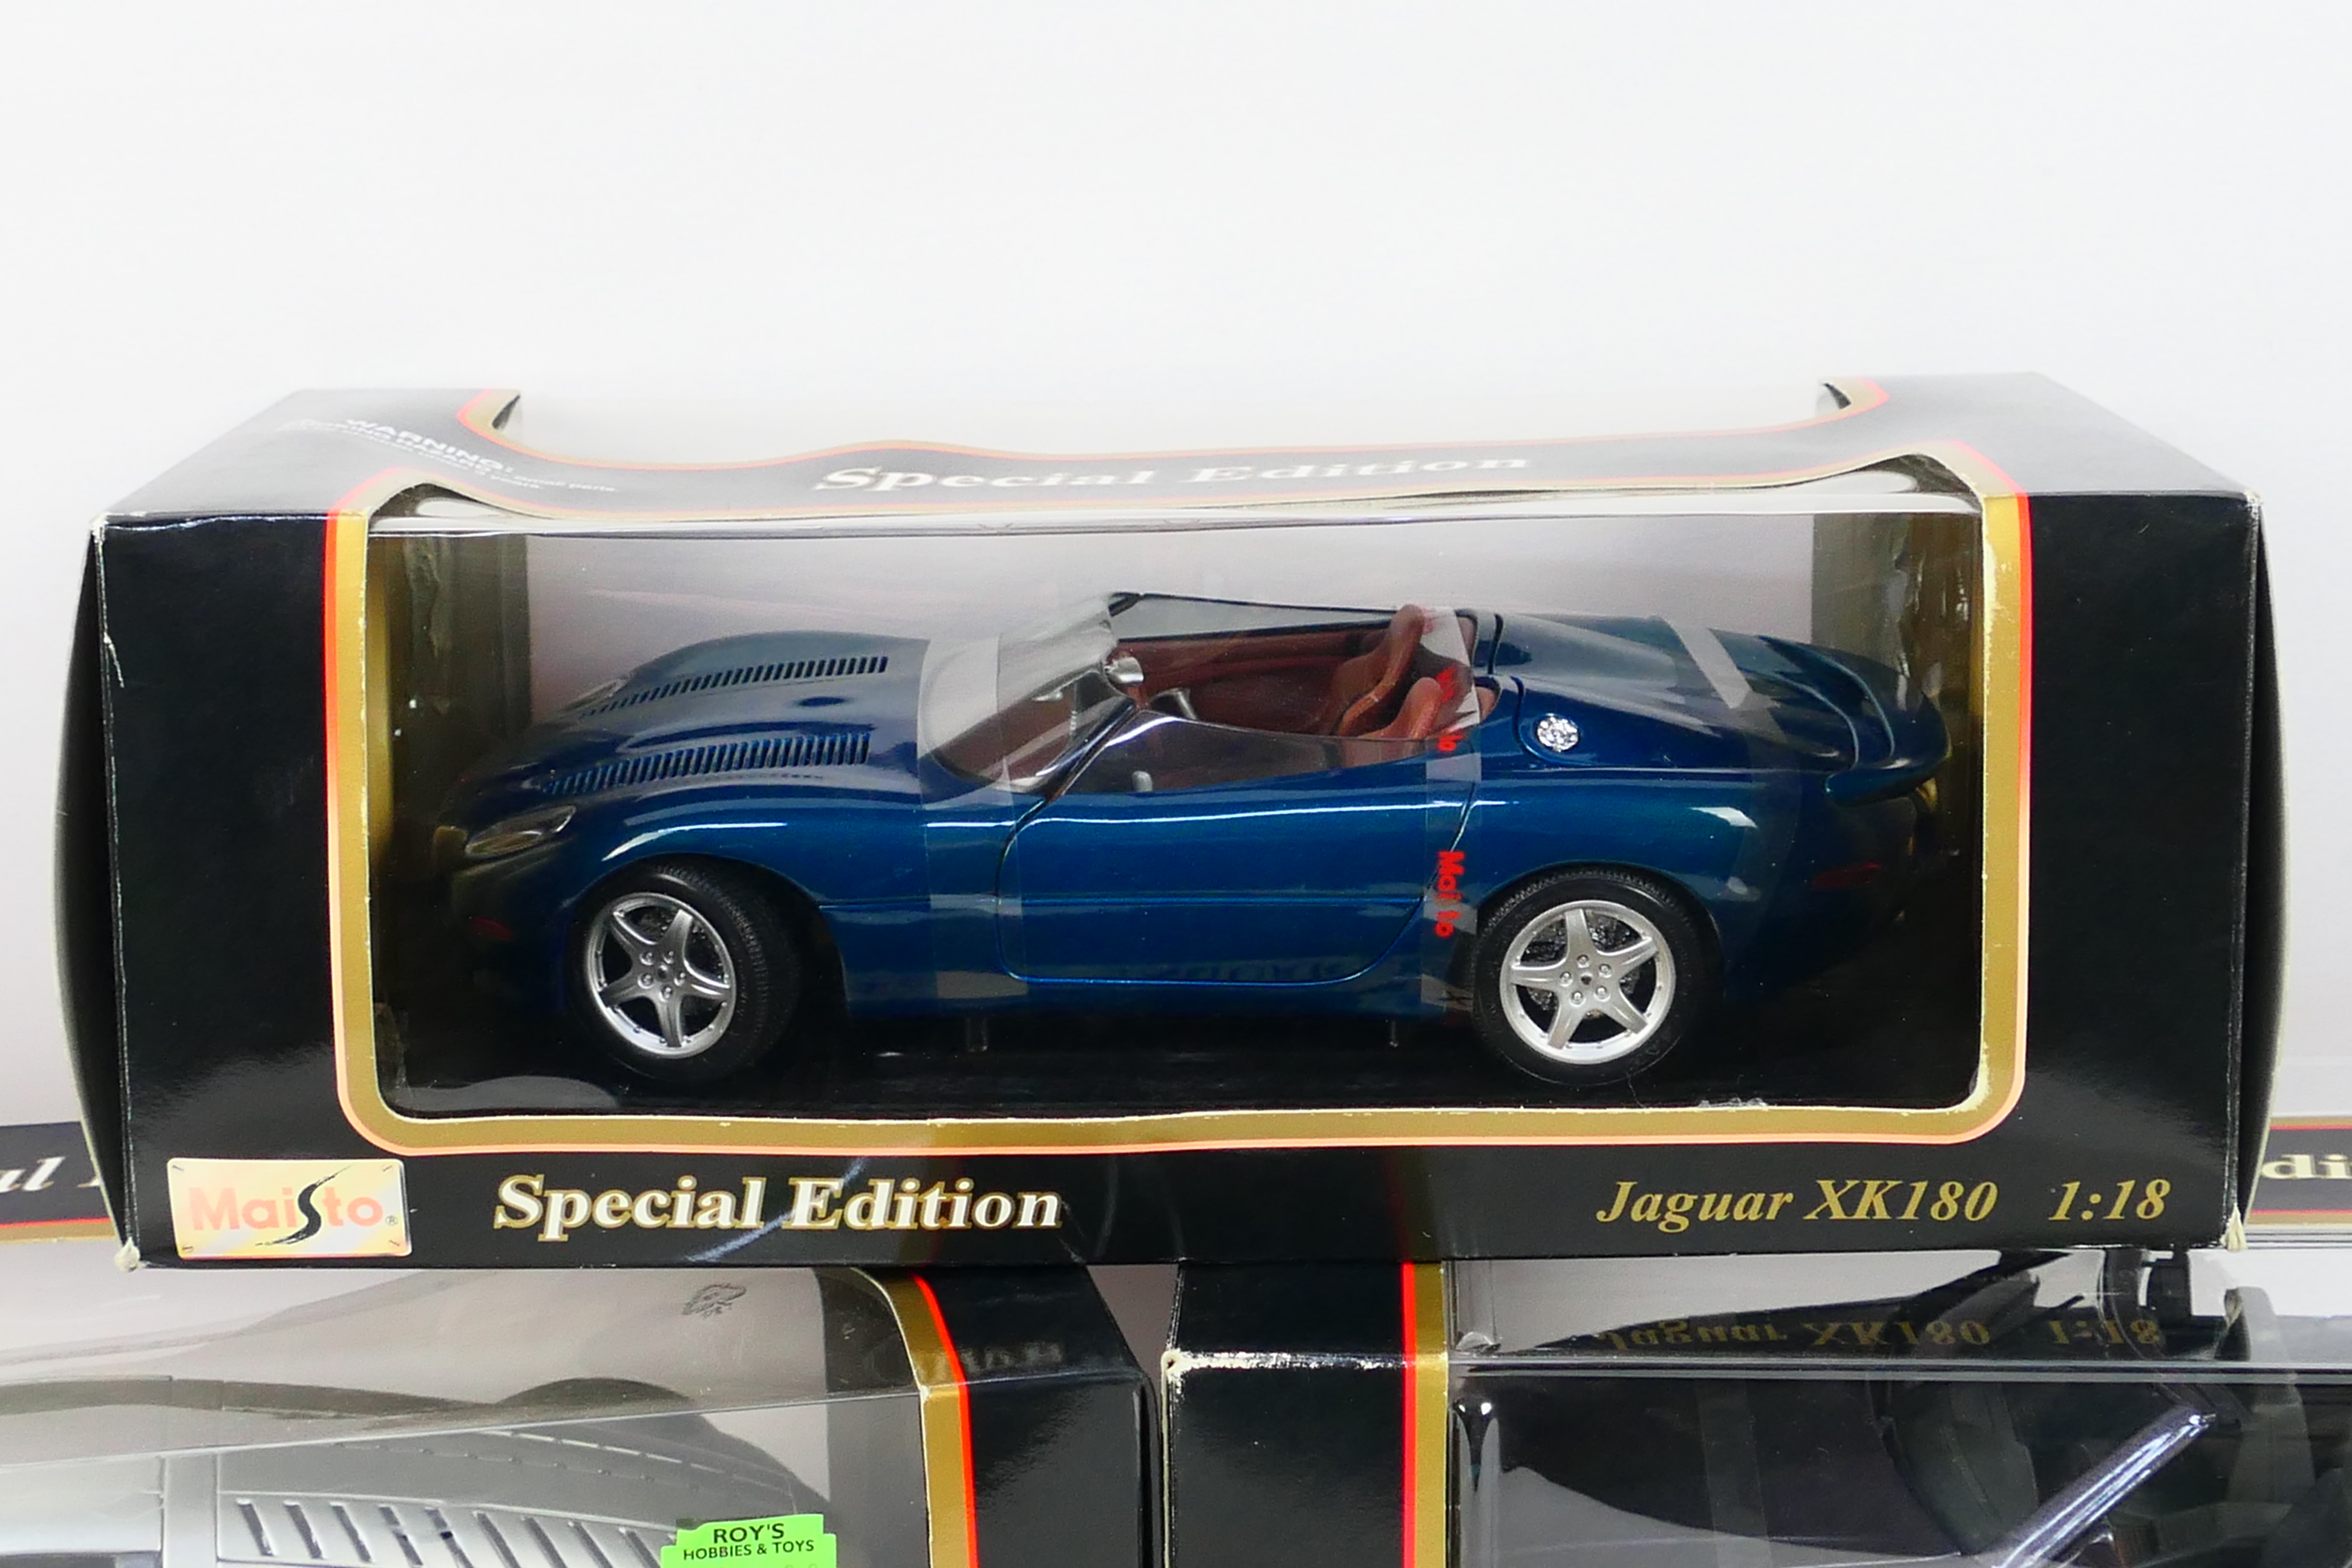 Maisto - Three boxed 1:18 scale Maisto 'Special Edition' diecast model cars. - Image 4 of 4